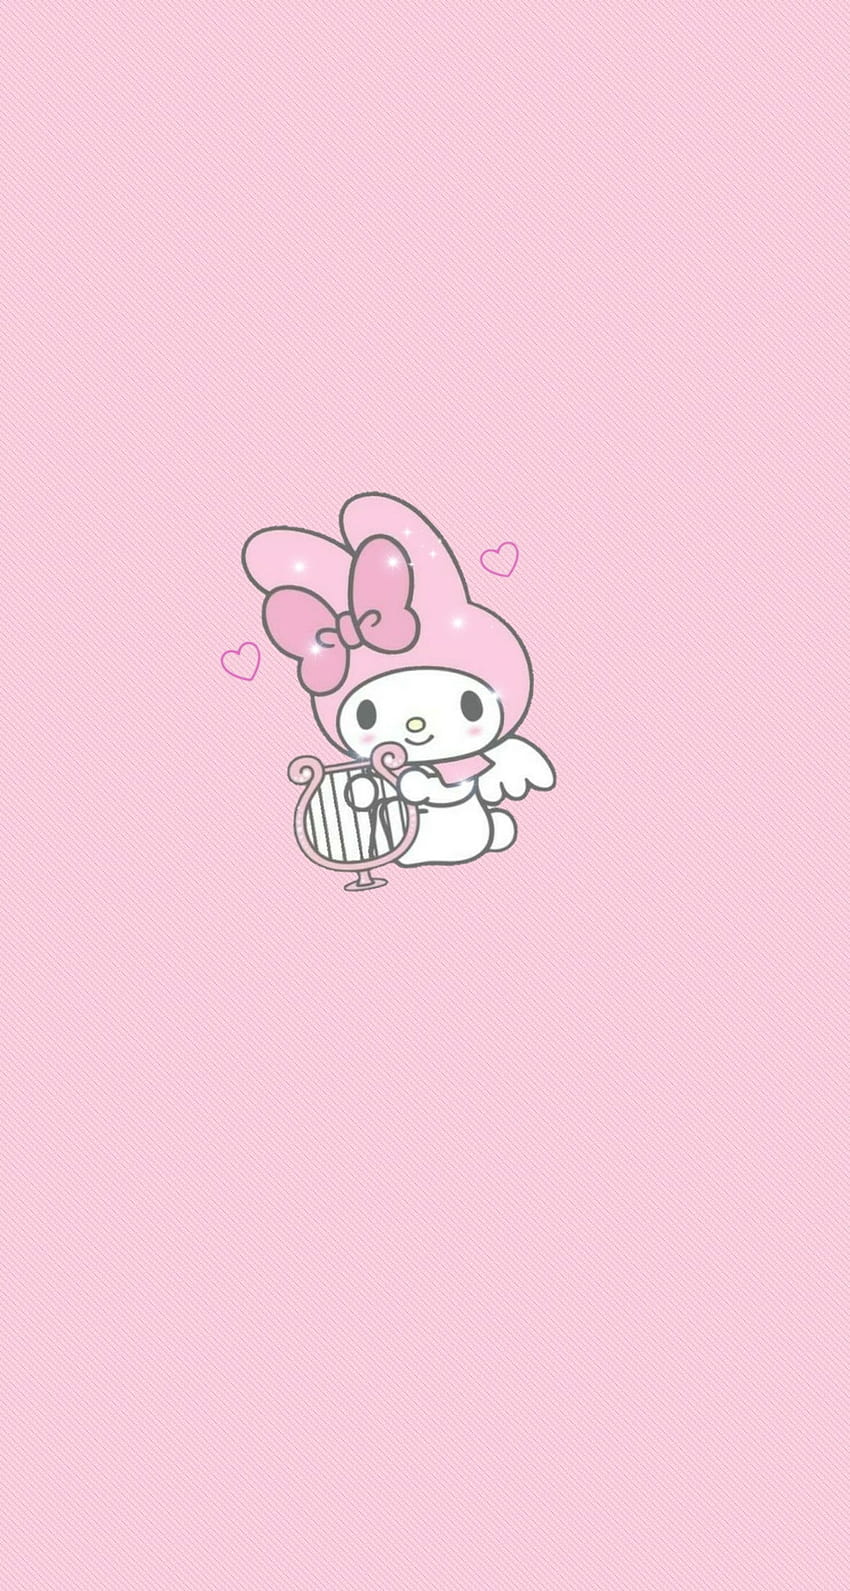 Sanrio aesthetic mymelody melody pink